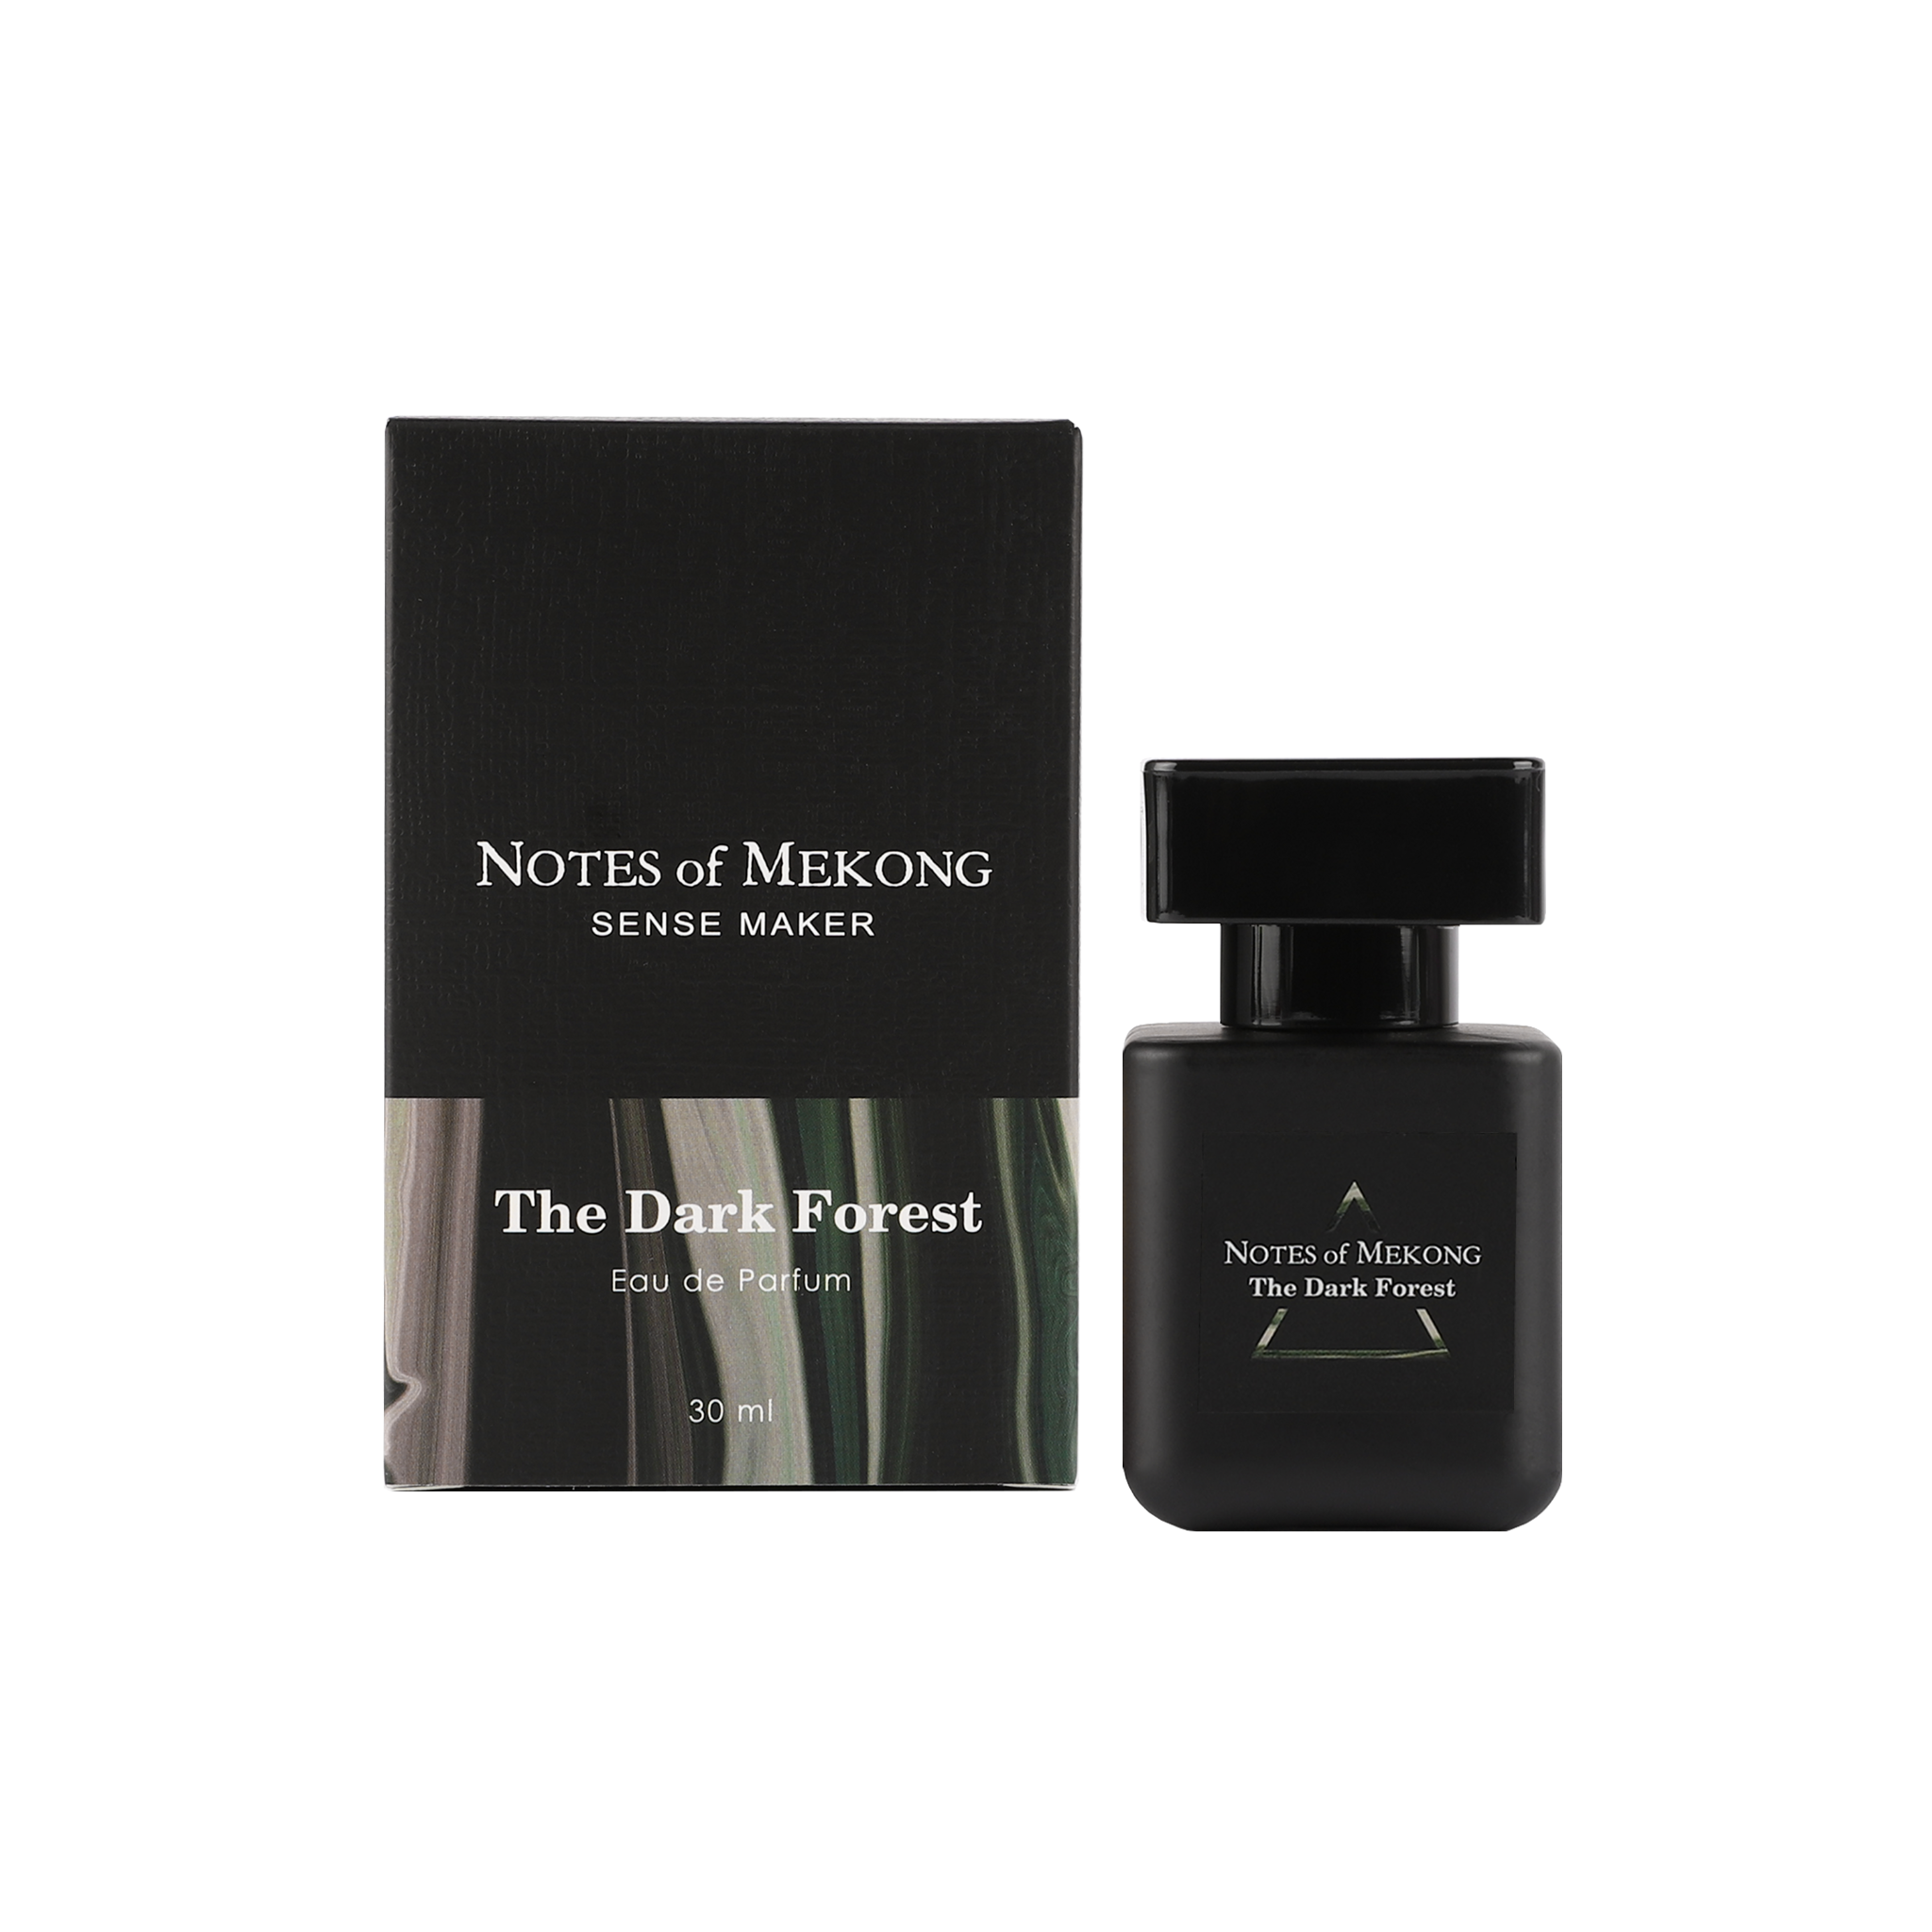  Nước hoa Notes of Mekong- The Dark Forest 